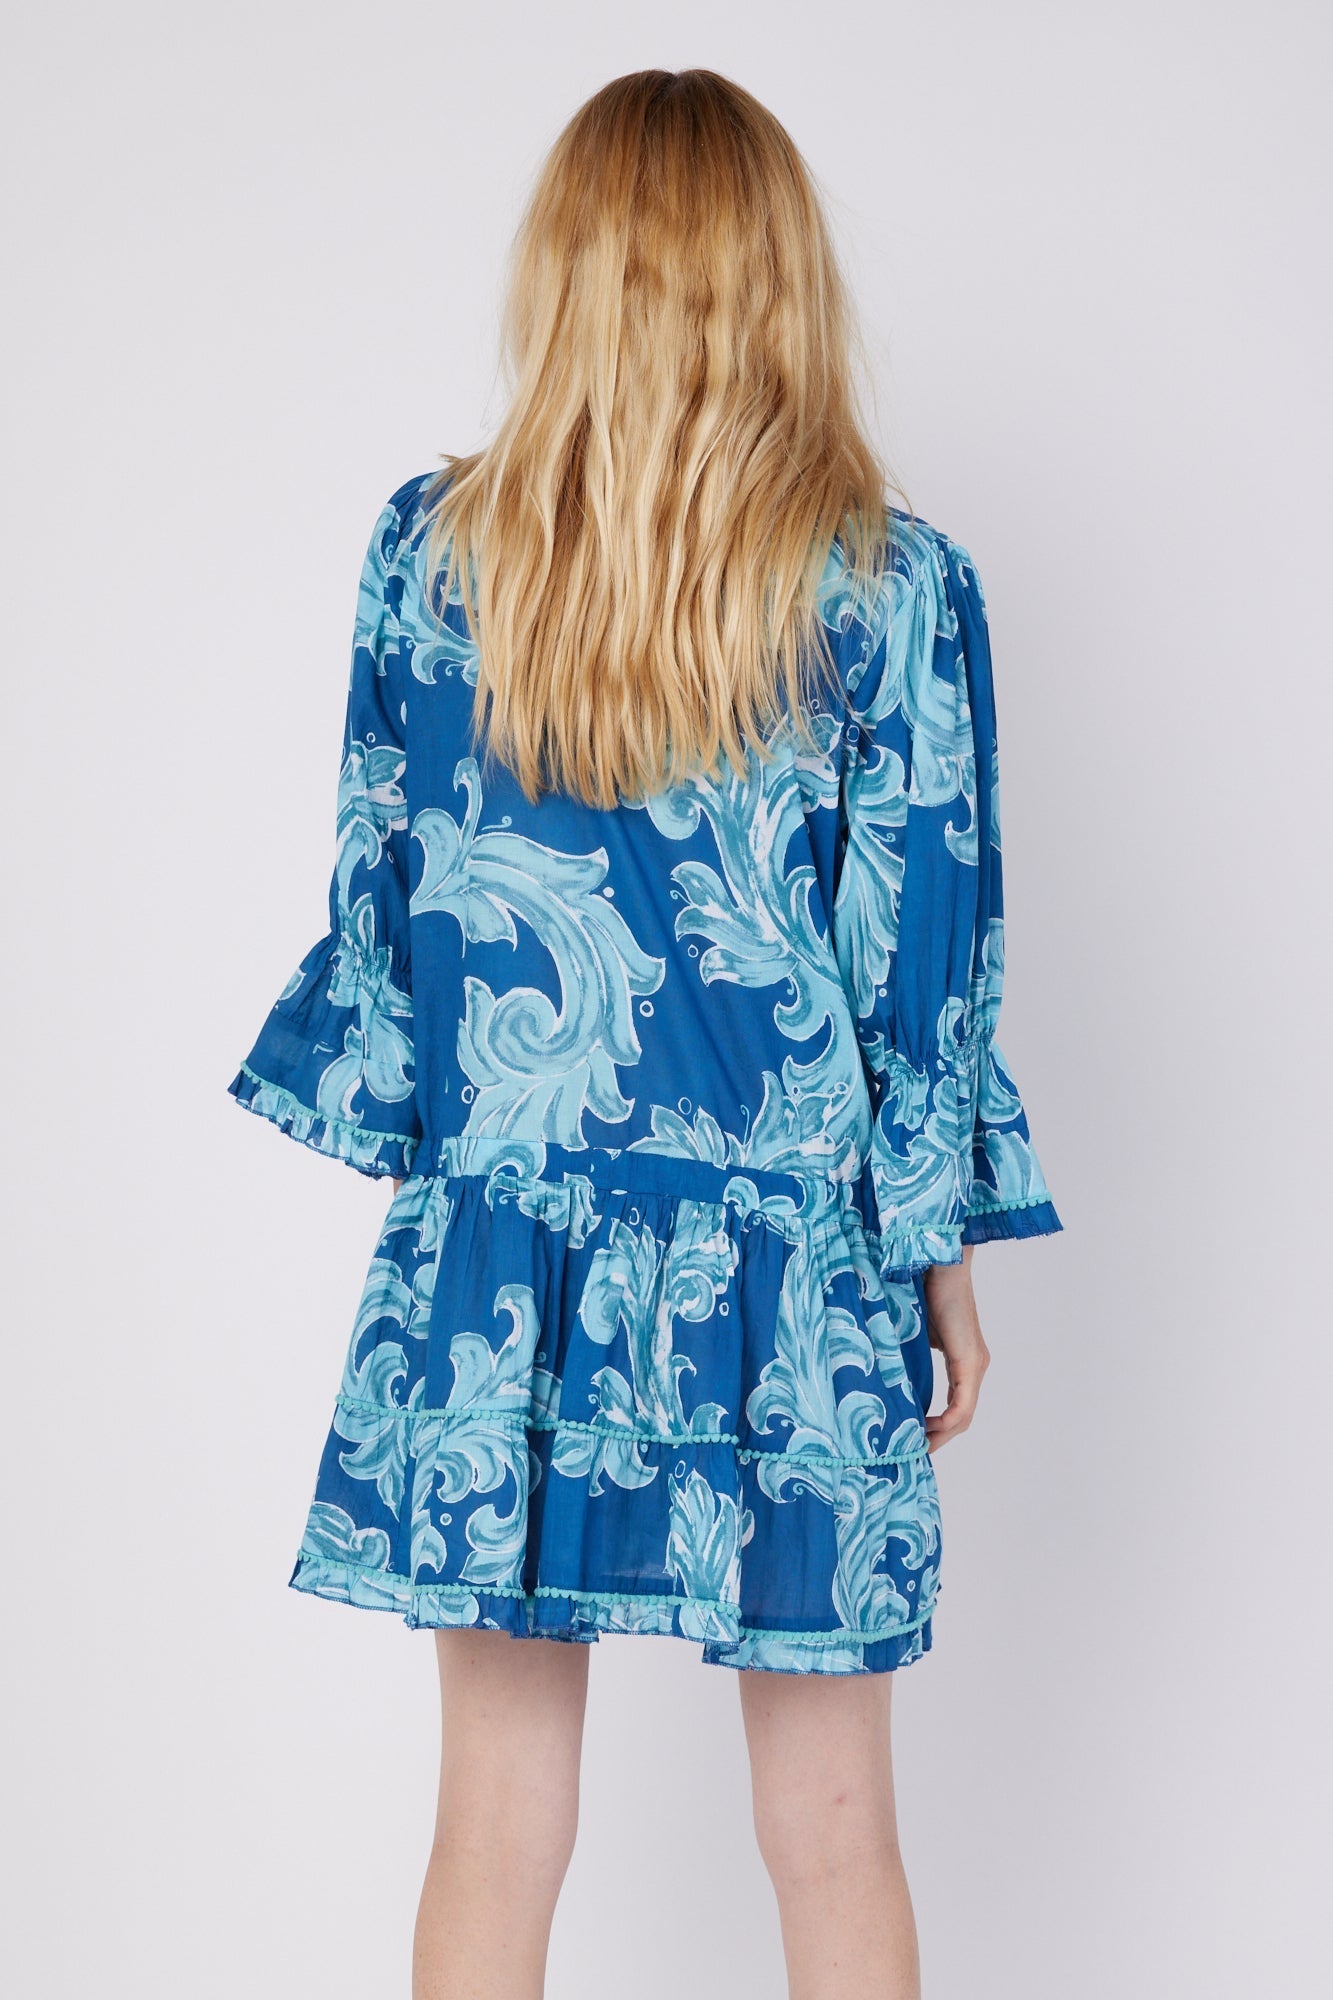 ModaPosa Penelope 3/4 Frill Puff Sleeve Drop Waist Mini Dress with Pockets in Deep Blue Baroque . Discover women's resort dresses and lifestyle clothing inspired by the Mediterranean. Free worldwide shipping available!